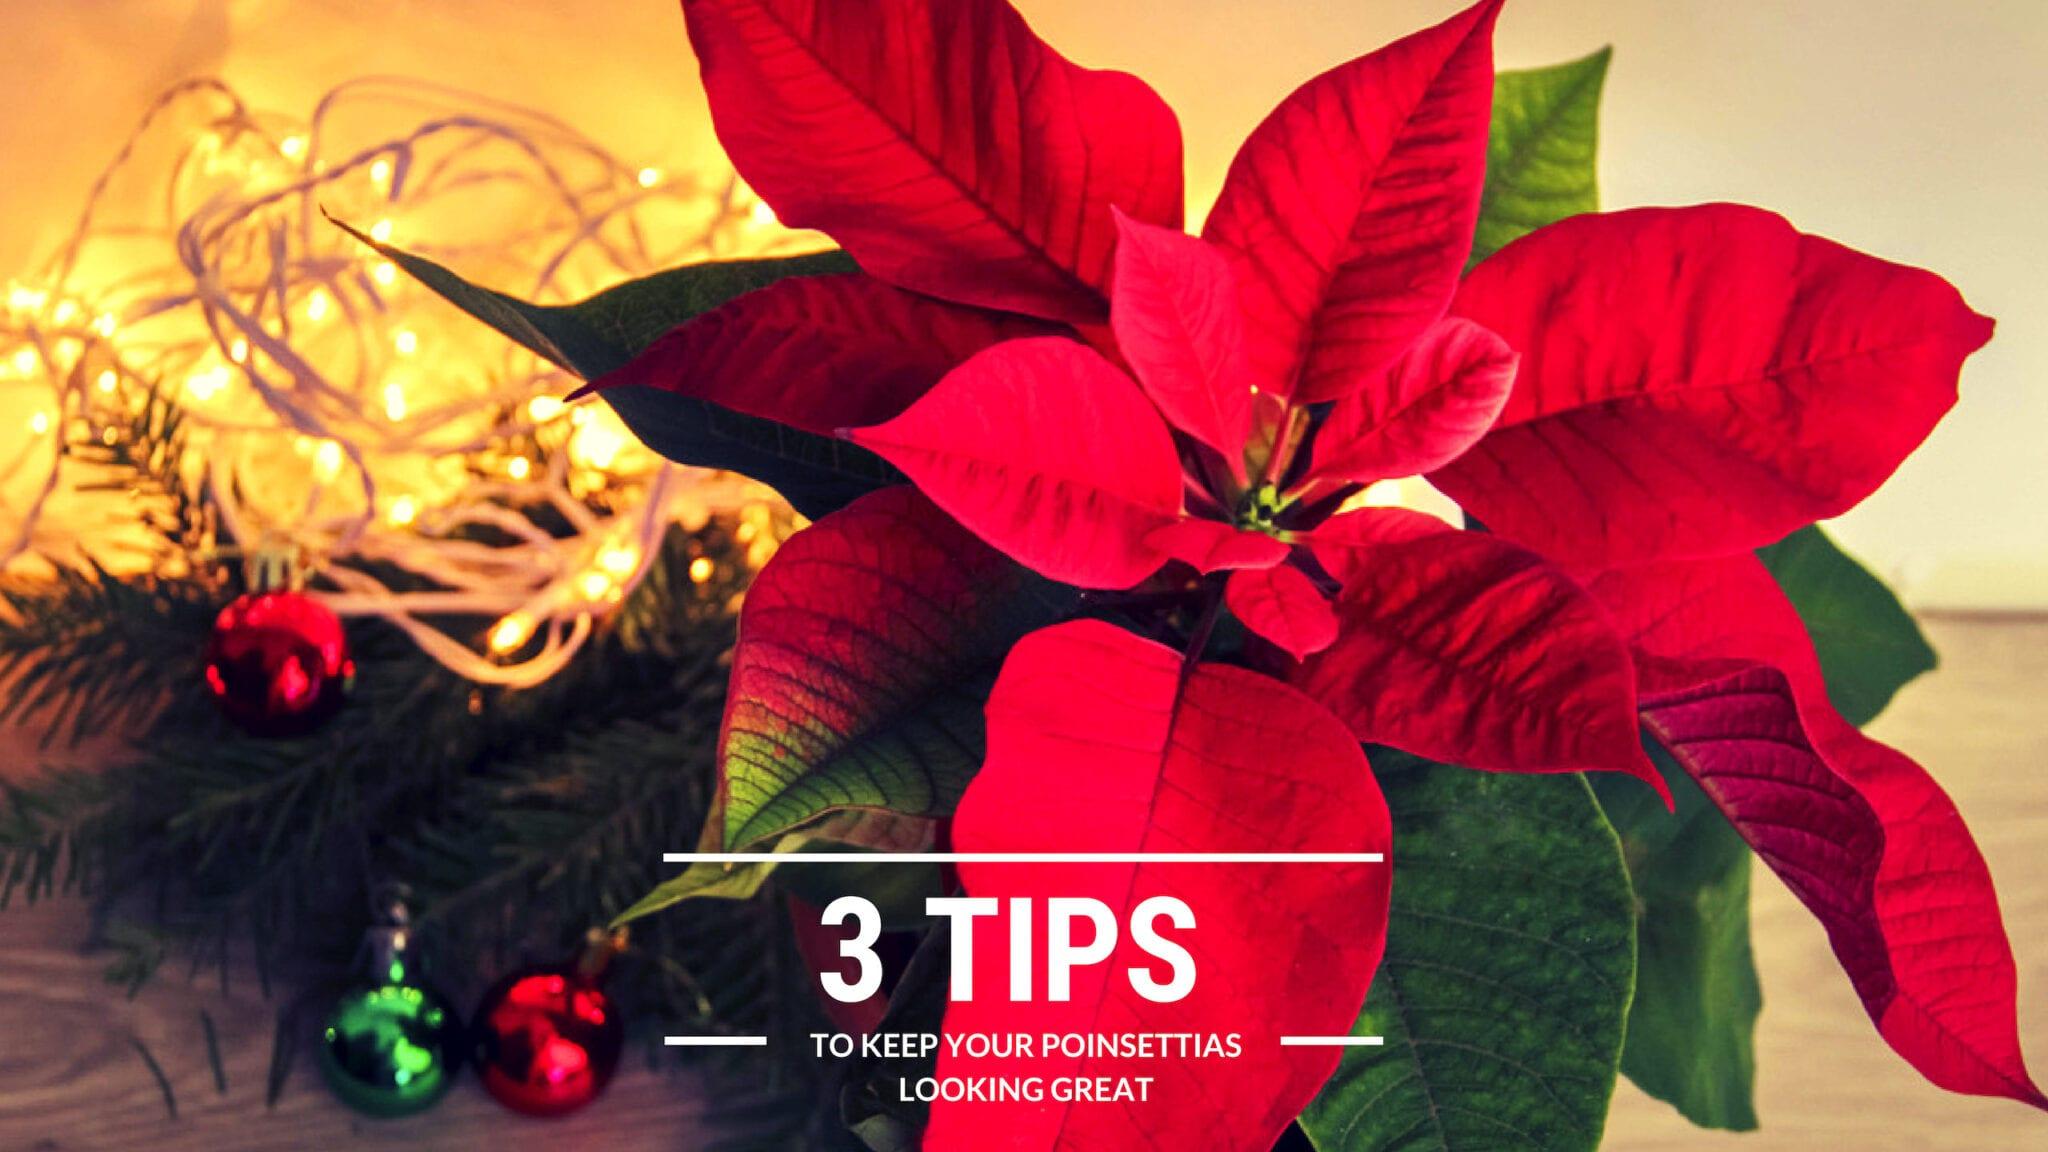 TUESDAY TIPS! TO KEEP YOUR POINSETTIAS LOOKING GREAT